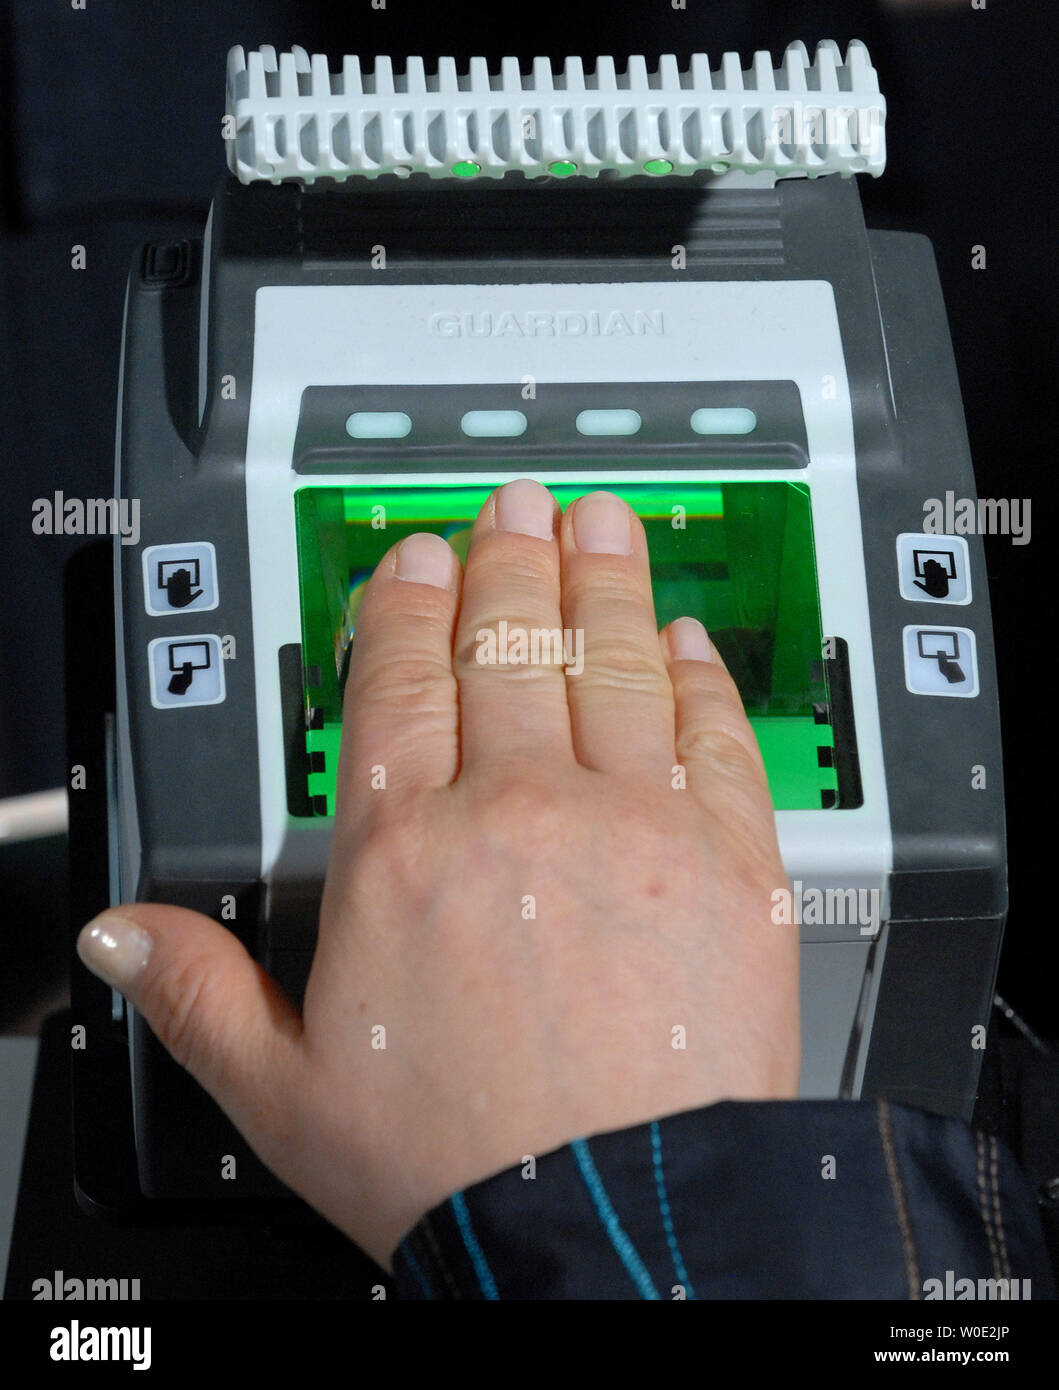 A Korean visitor to the United States has their fingerprints scanned by the Cross Match Technologies L SCAN GUARDIAN scanner that obtains all 10 fingerprints of international visitors entering the U.S. through customs at Dulles International Airport in Dulles, Virginia, on December 10, 2007. The DHS plans to deploy the ten-fingerprint scanners, up from current two-print scanners, at all U.S. points of entry over the next year.    (UPI Photo/Roger L. Wollenberg) Stock Photo